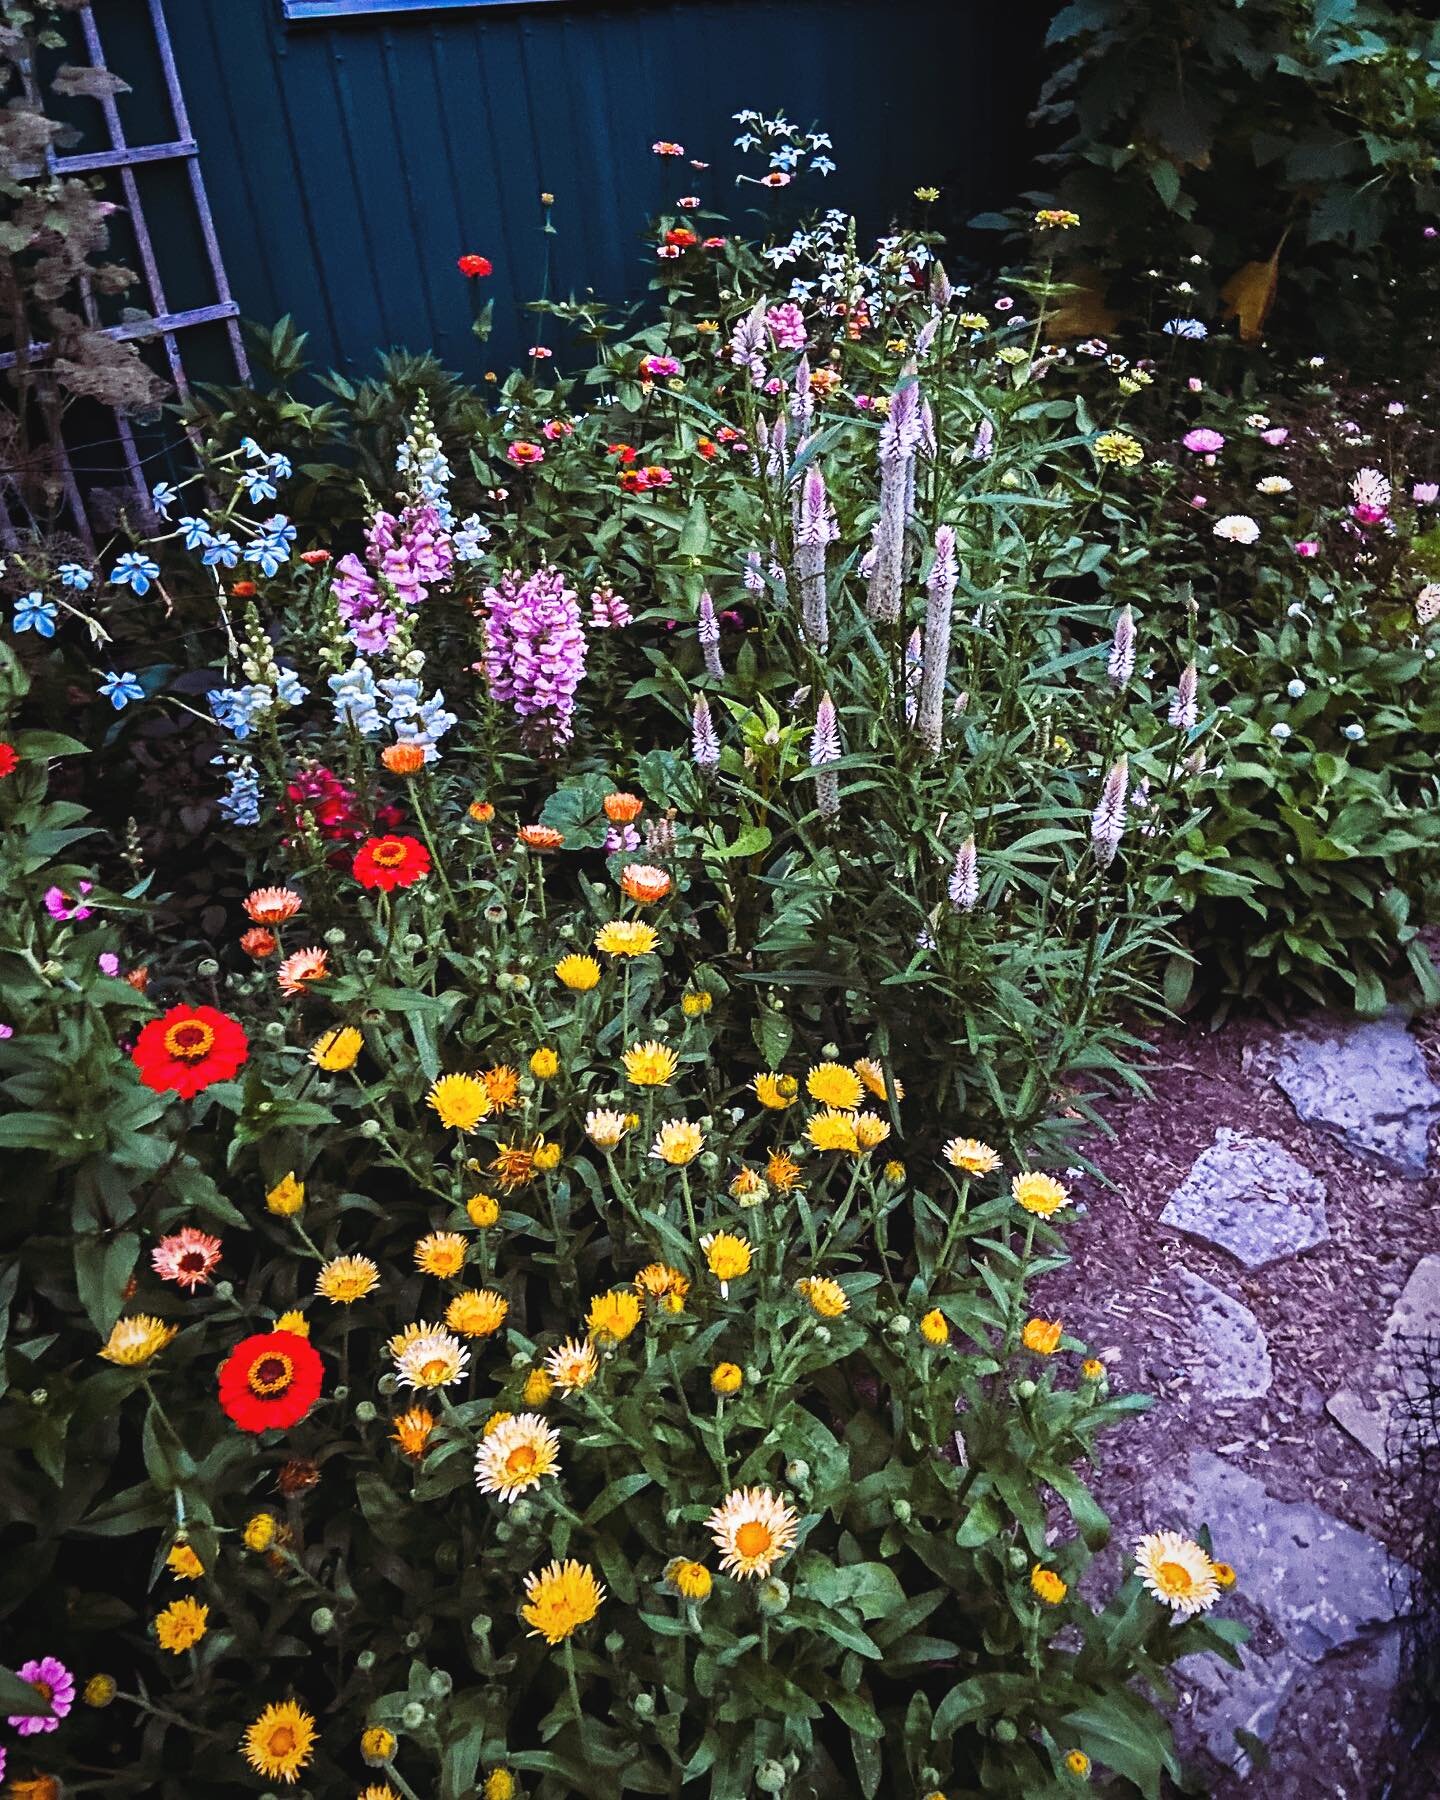 /POCKET GARDEN/
.
A little bit of earth and a few packets of seeds. We made a non-grid cutting garden for a beloved South Bay client a few years ago with locally sourced seed and patience. Rows and rows of tulips followed by Peonies, then Celosia, Sn